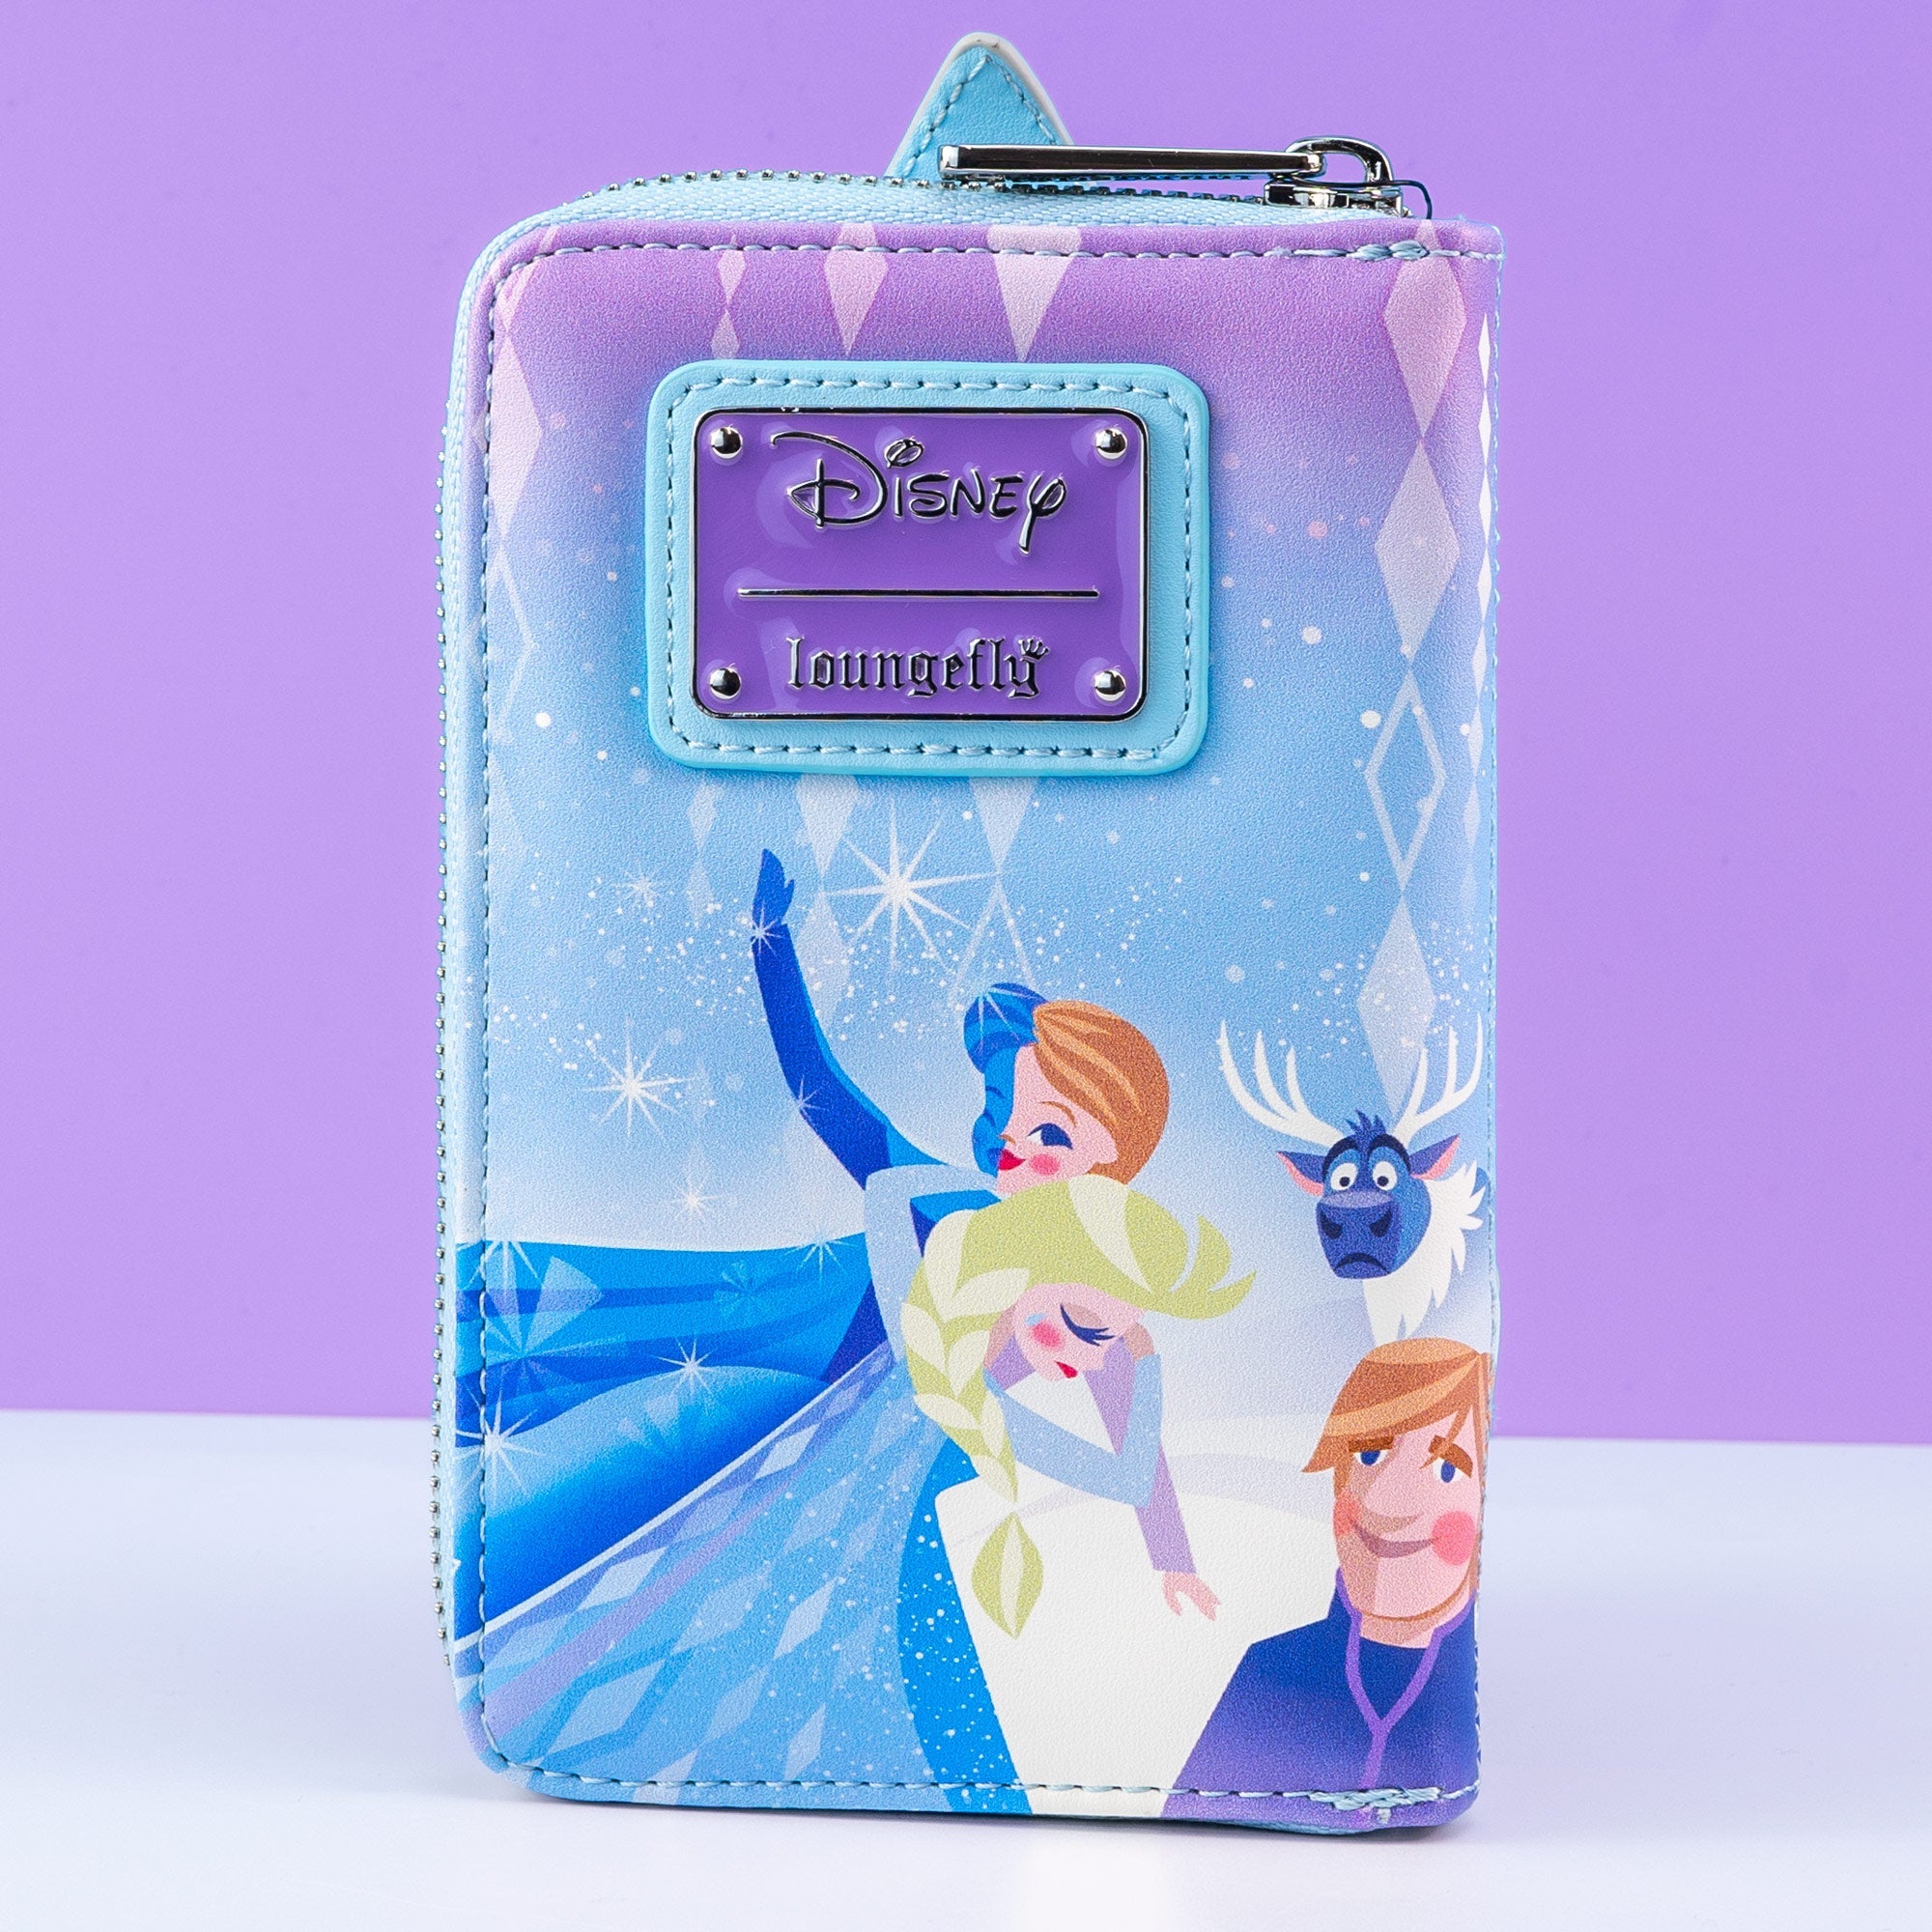 Loungefly x Disney Frozen Elsa, Anna and Olaf Castle Purse - GeekCore